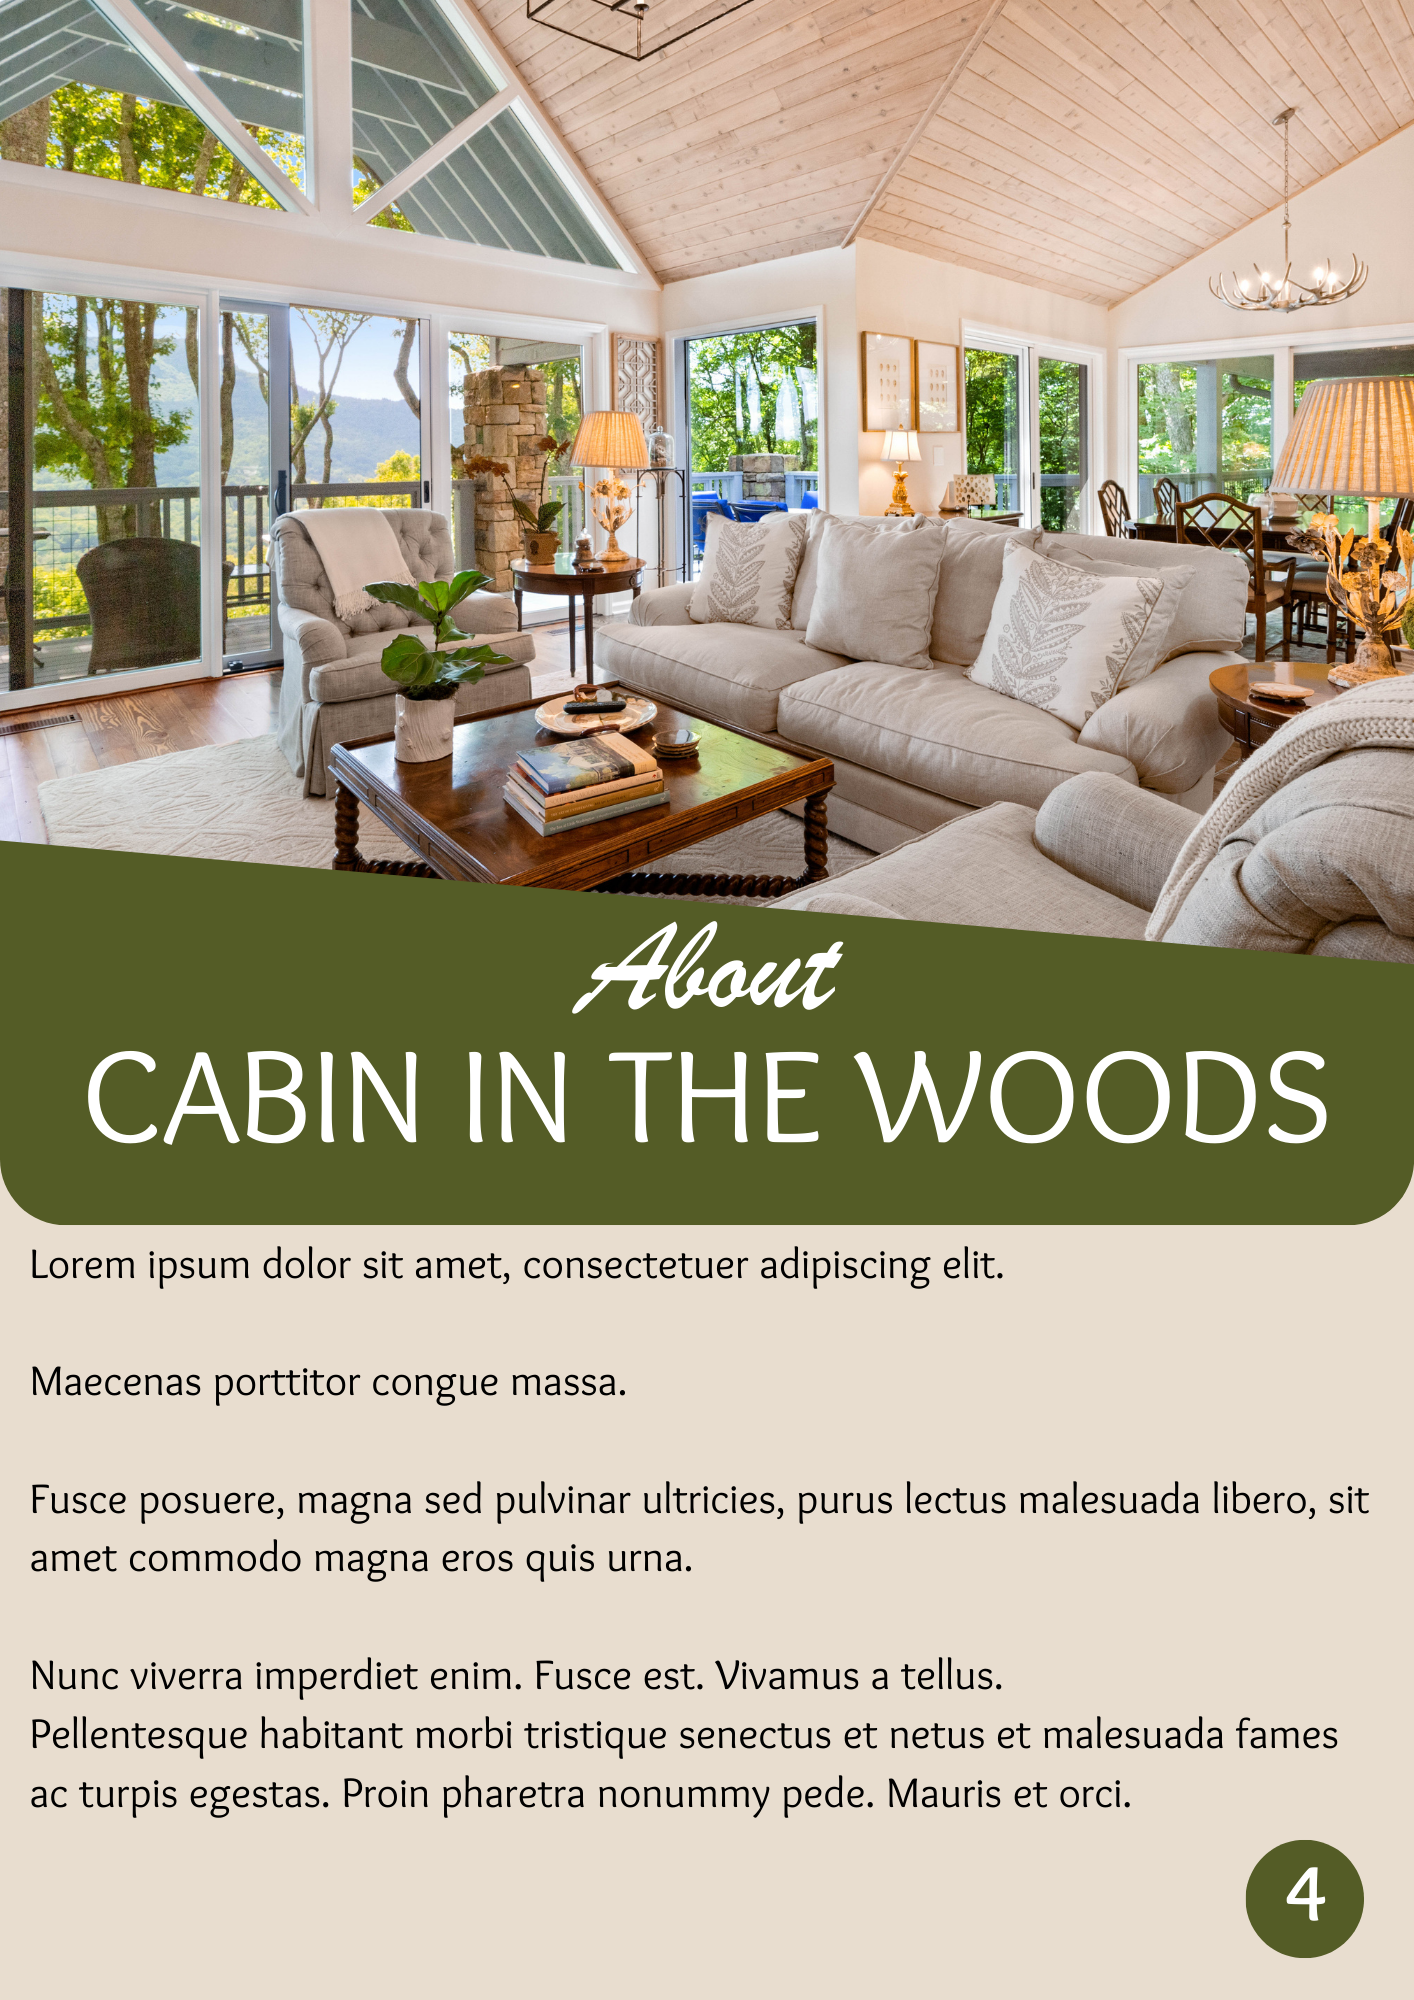 Editable Digital Airbnb & Short-Term Rental Welcome Book Template-Cabin in the Woods